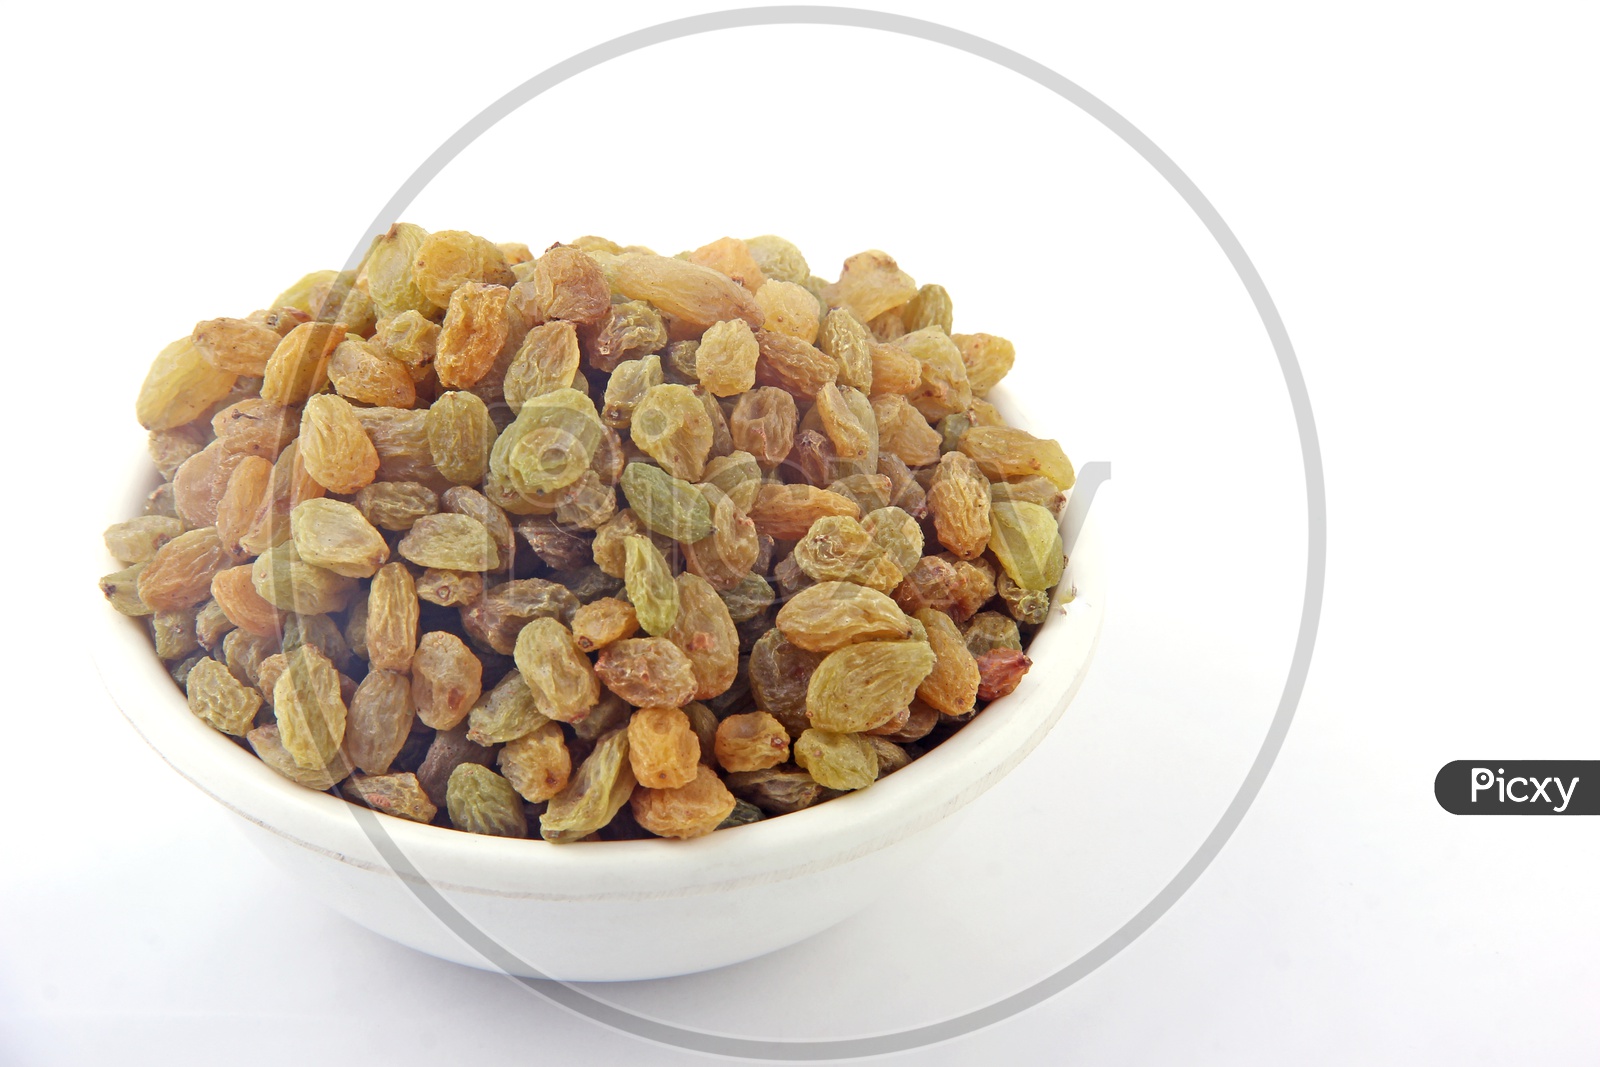 Bowl of Raisins / raisins in a Bowl isolated on a White Background